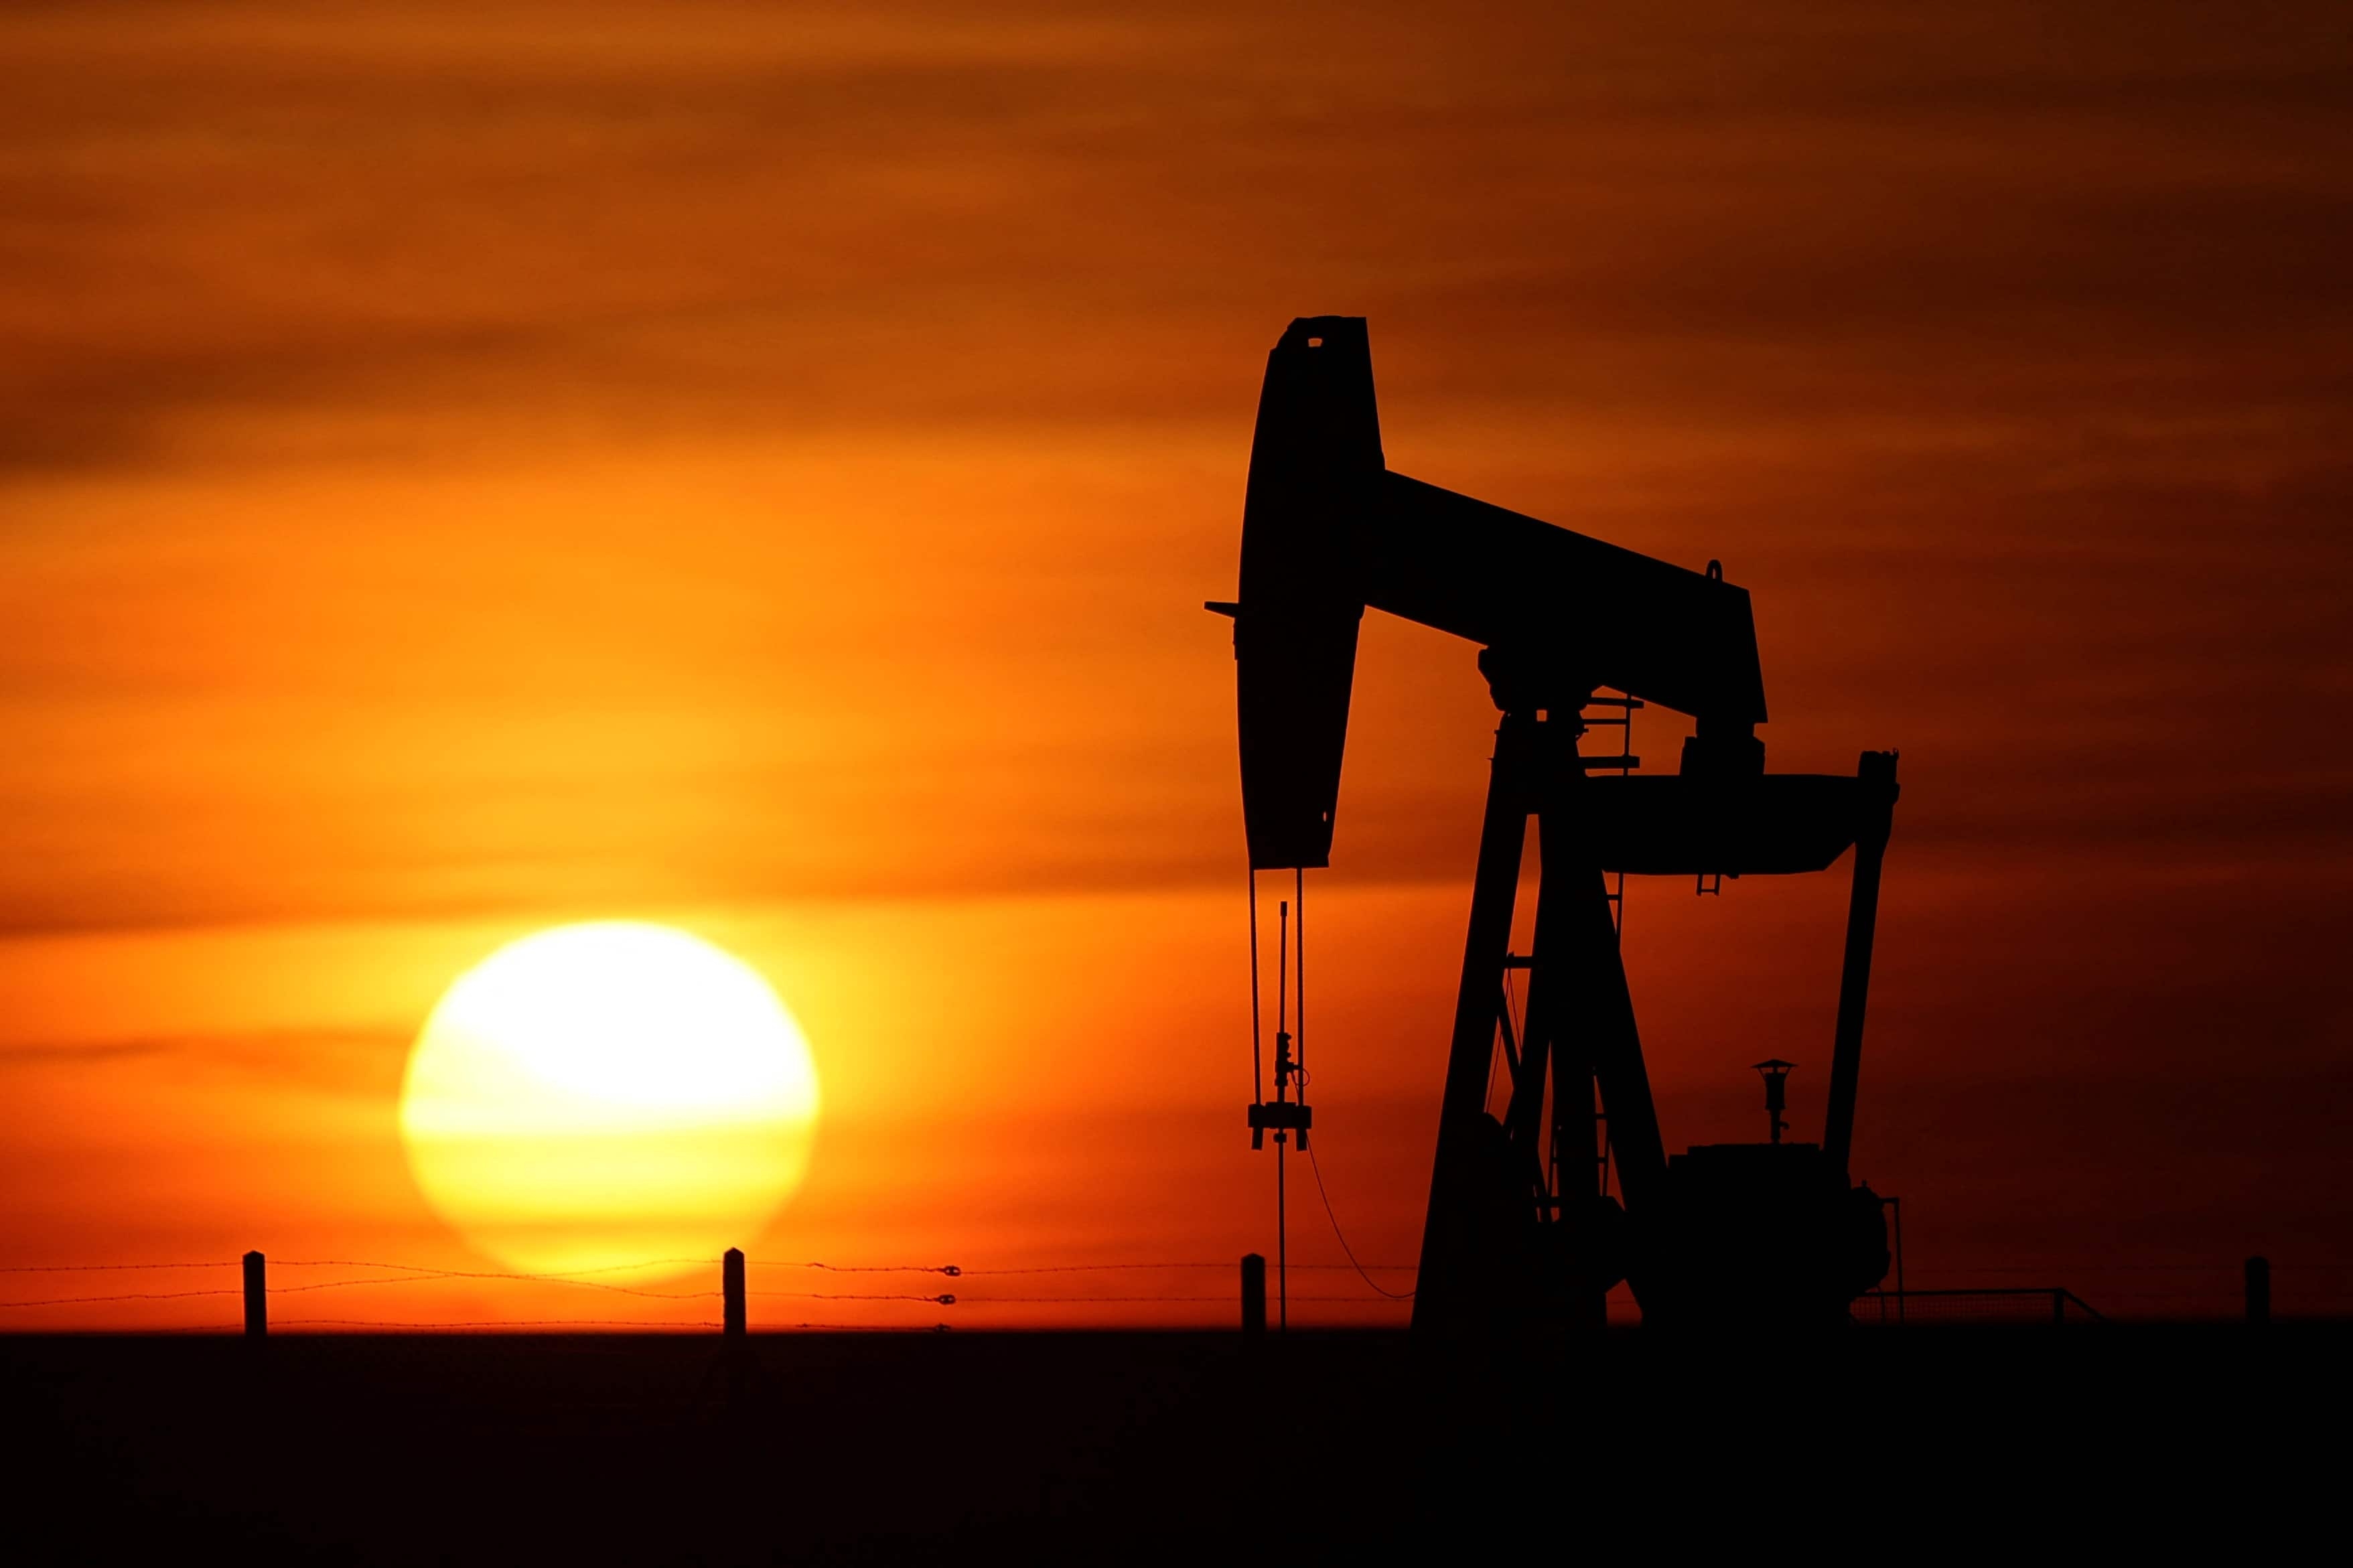 Oil prices edged lower in early Asian trade on Tuesday, adding to a 6% slump in the previous session, as coronavirus lockdowns in top oil importer China and potential economic ructions in Europe fed worries about the demand outlook. Brent crude fell 36 cents, or 0.3%, to $105.58 at 0009 GMT. US West Texas Intermediate crude fell 23 cents, or 0.2%, to $102.86 a barrel. Prices dropped over $1 earlier in the session but pared their losses. Both contracts are still up about 35% so far this year.